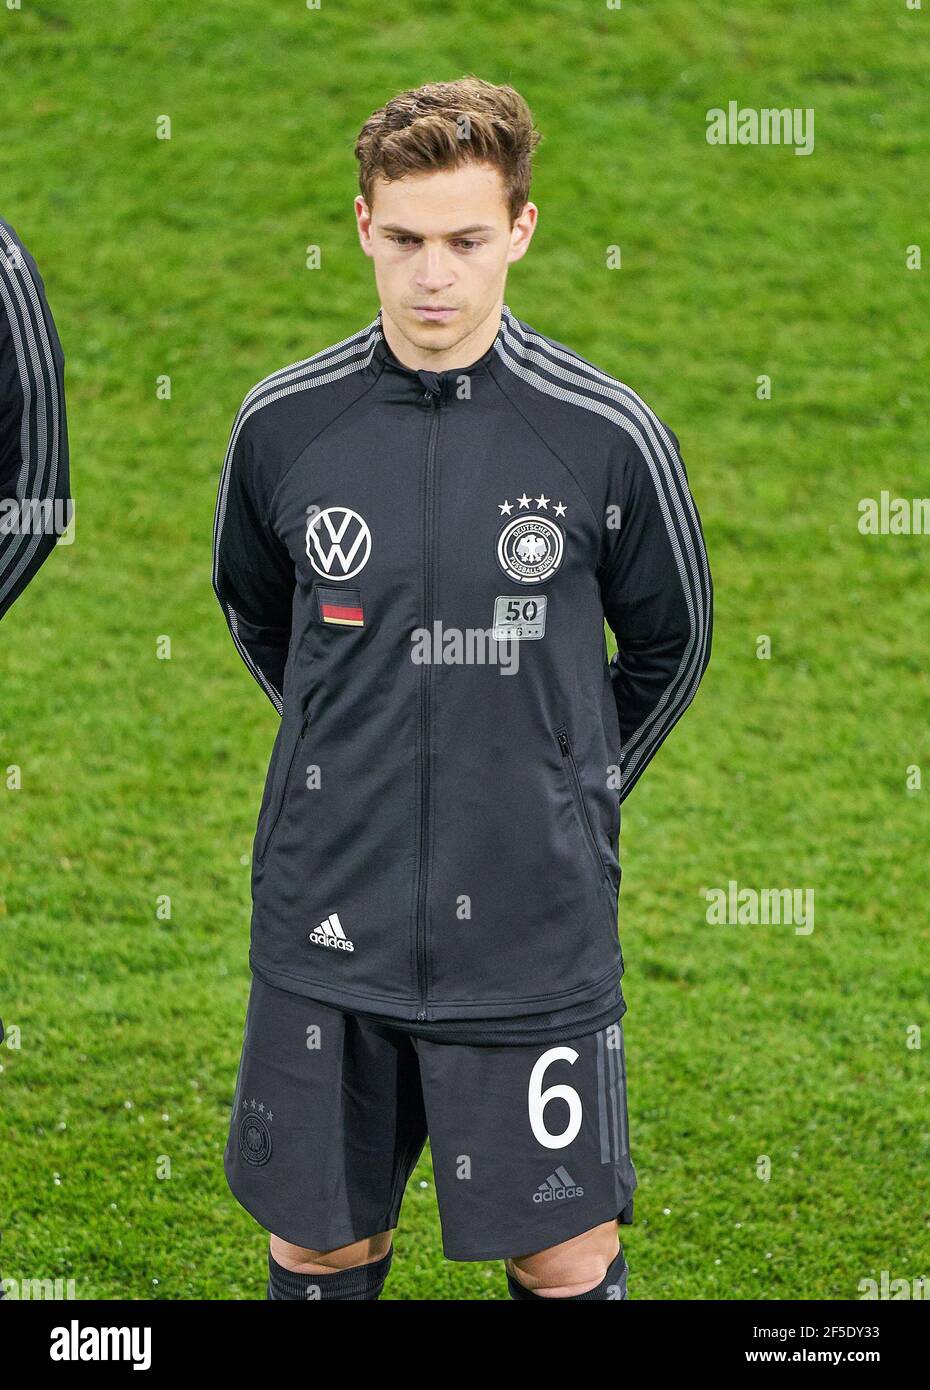 Joshua KIMMICH, DFB 6  half-size, portrait, one person, single, Aktion, Einzelbild, angeschnittenes Einzelmotiv, Halbfigur, halbe Figur,  in the match GERMANY - ICELAND 3-0 Deutschland - ISLAND 3-0 Qualification for World Championships, WM Quali, Season 2020/2021,  March 25, 2021  in Duisburg, Germany.  © Peter Schatz / Alamy Live News  Important: DFB regulations prohibit any use of photographs as image sequences and/or quasi-video. Stock Photo